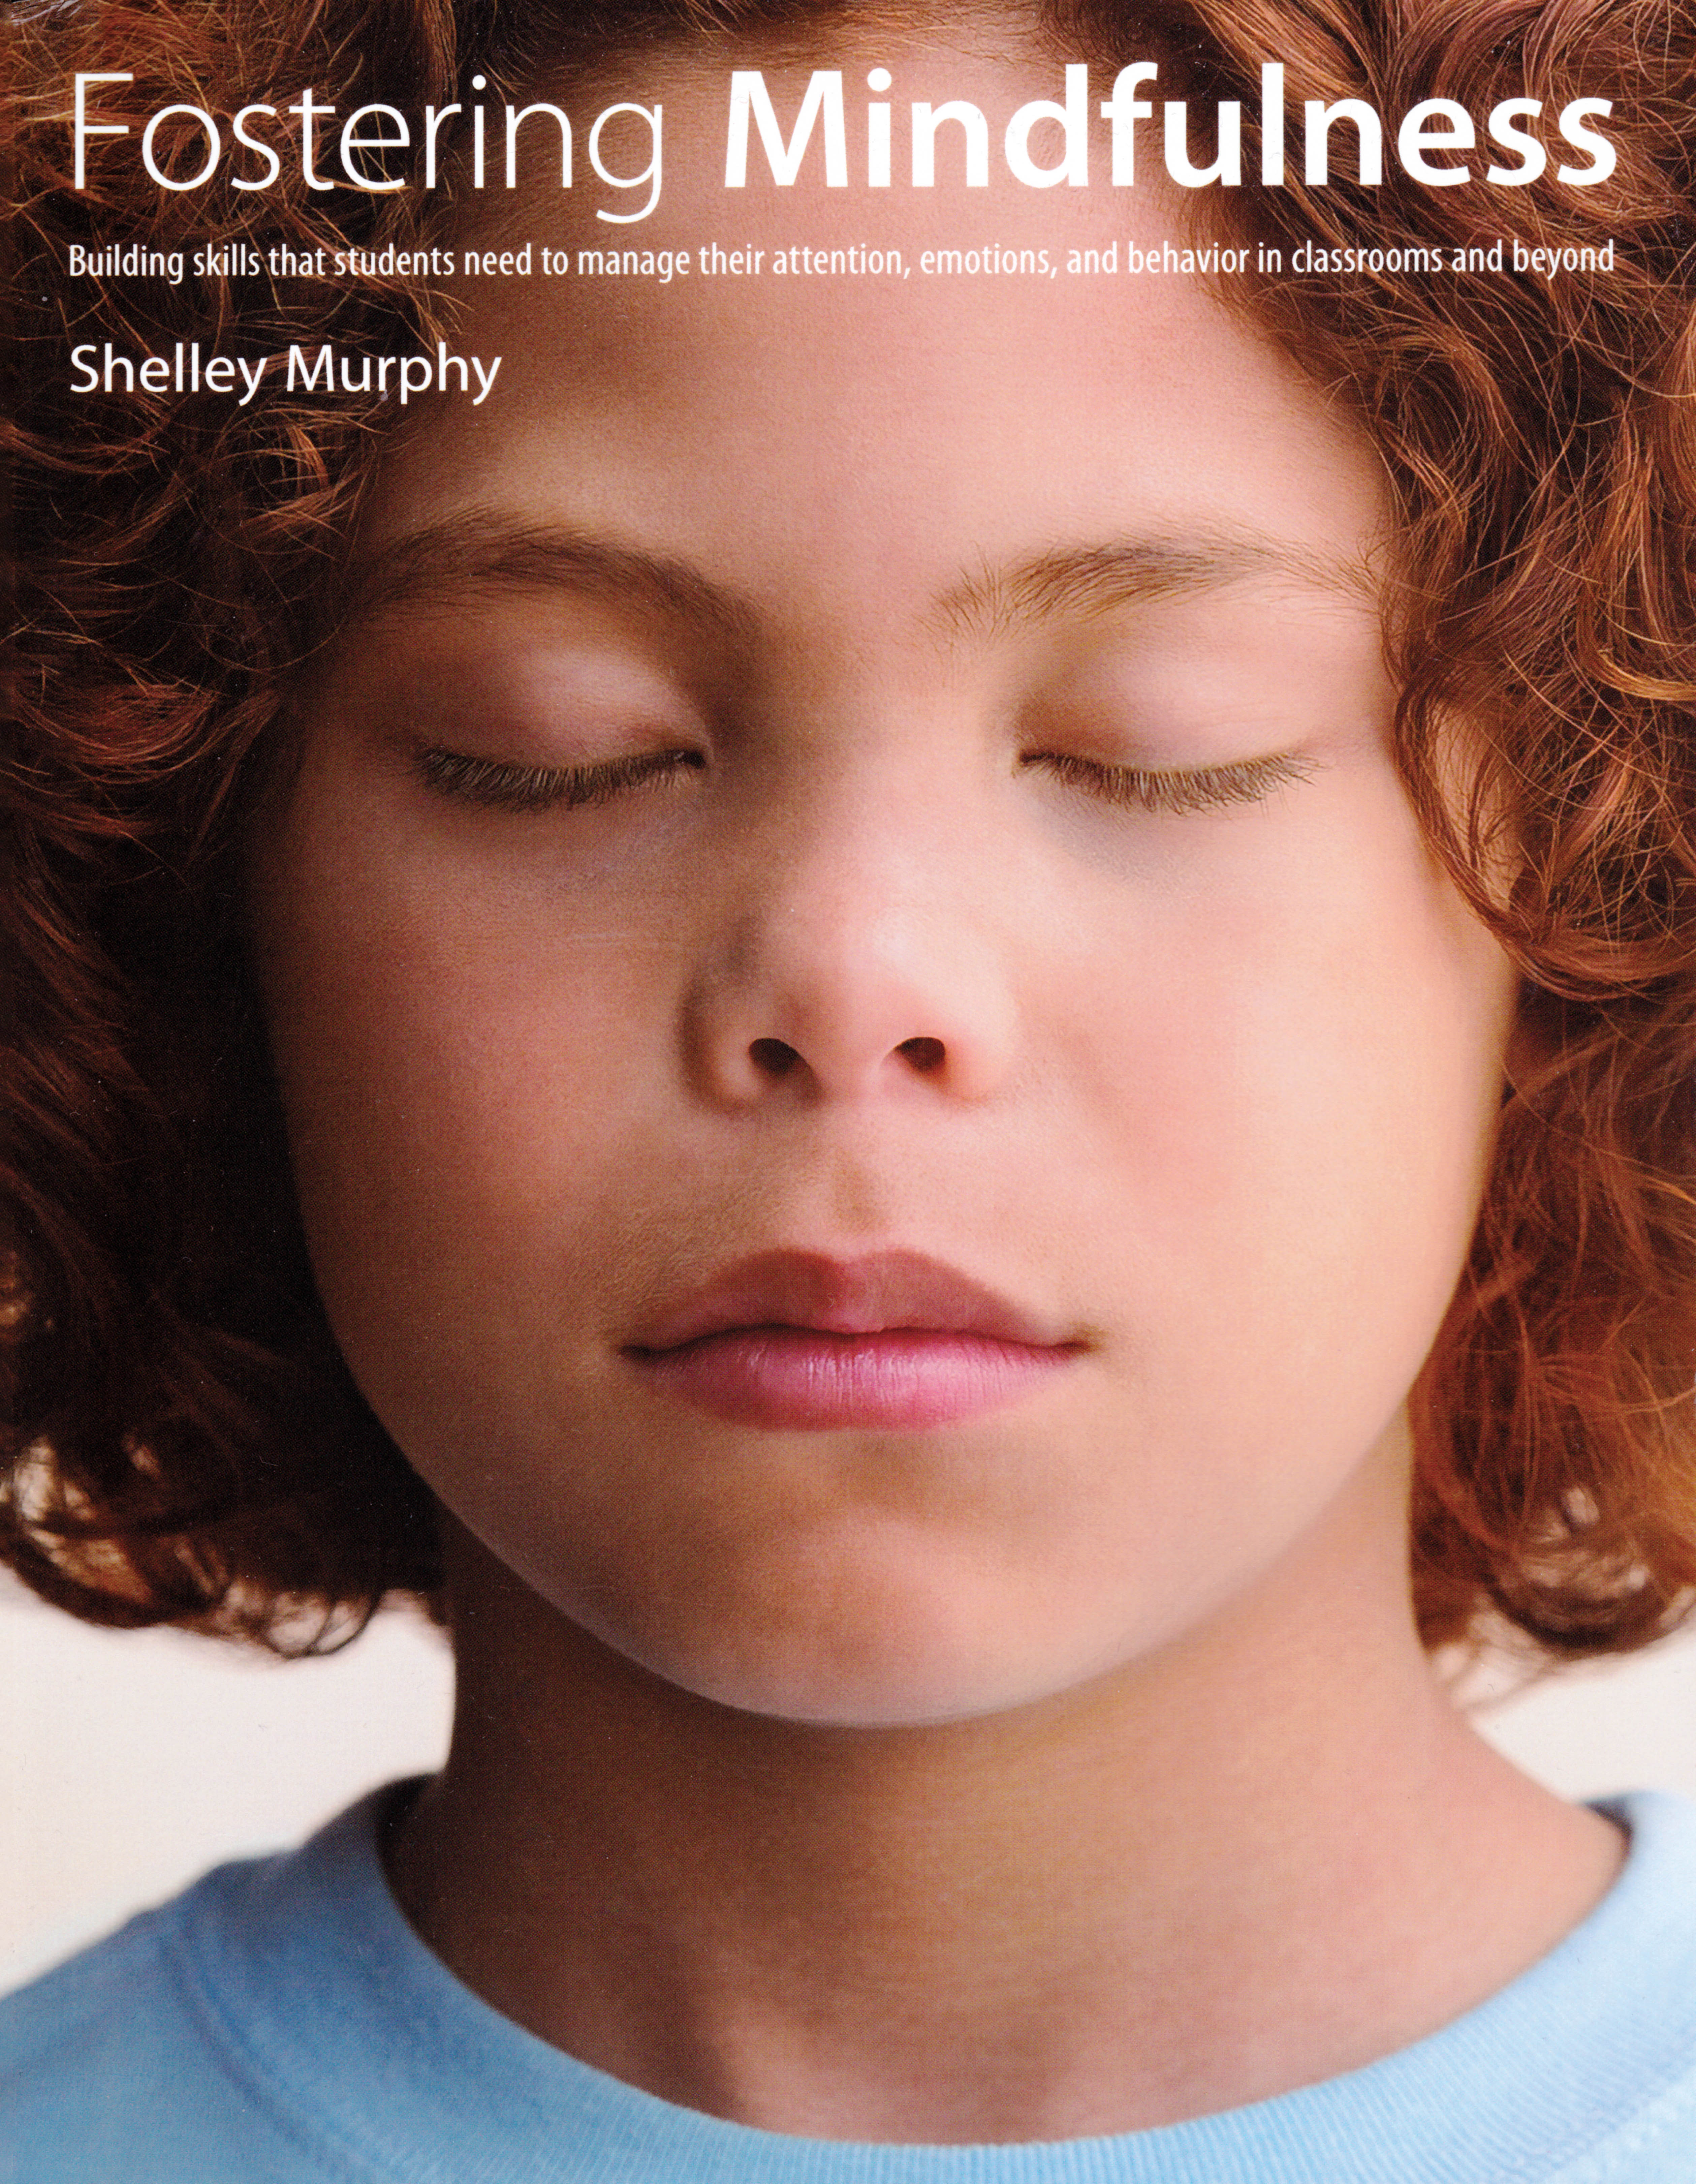 Photo of a book cover of 'Fostering Mindfulness.' The cover is a person's face with their eyes closed.
